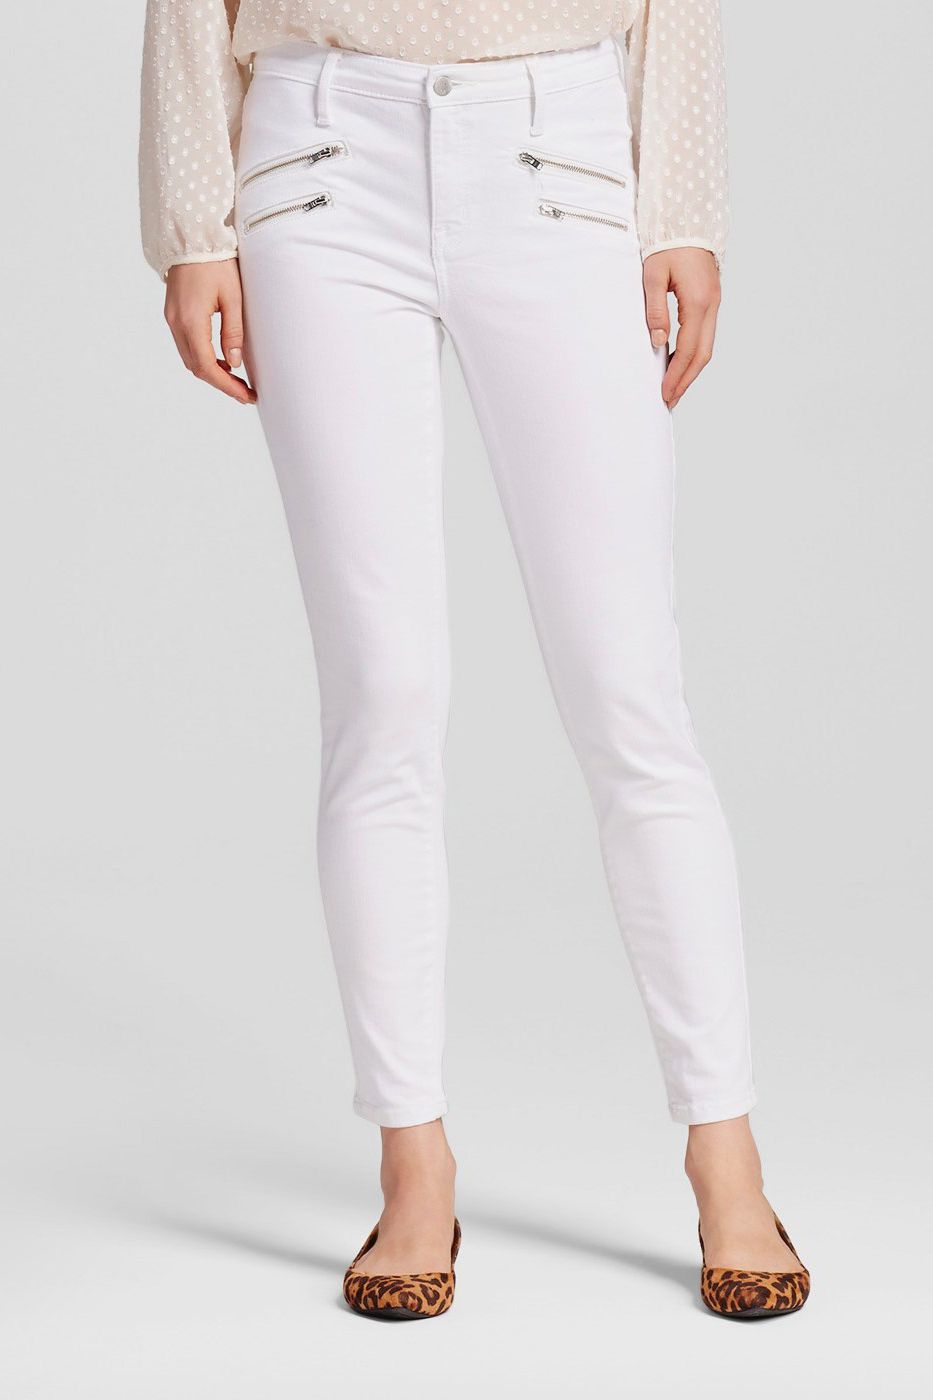 The Best White Jeans for Women of All Sizes 2018 | The Strategist